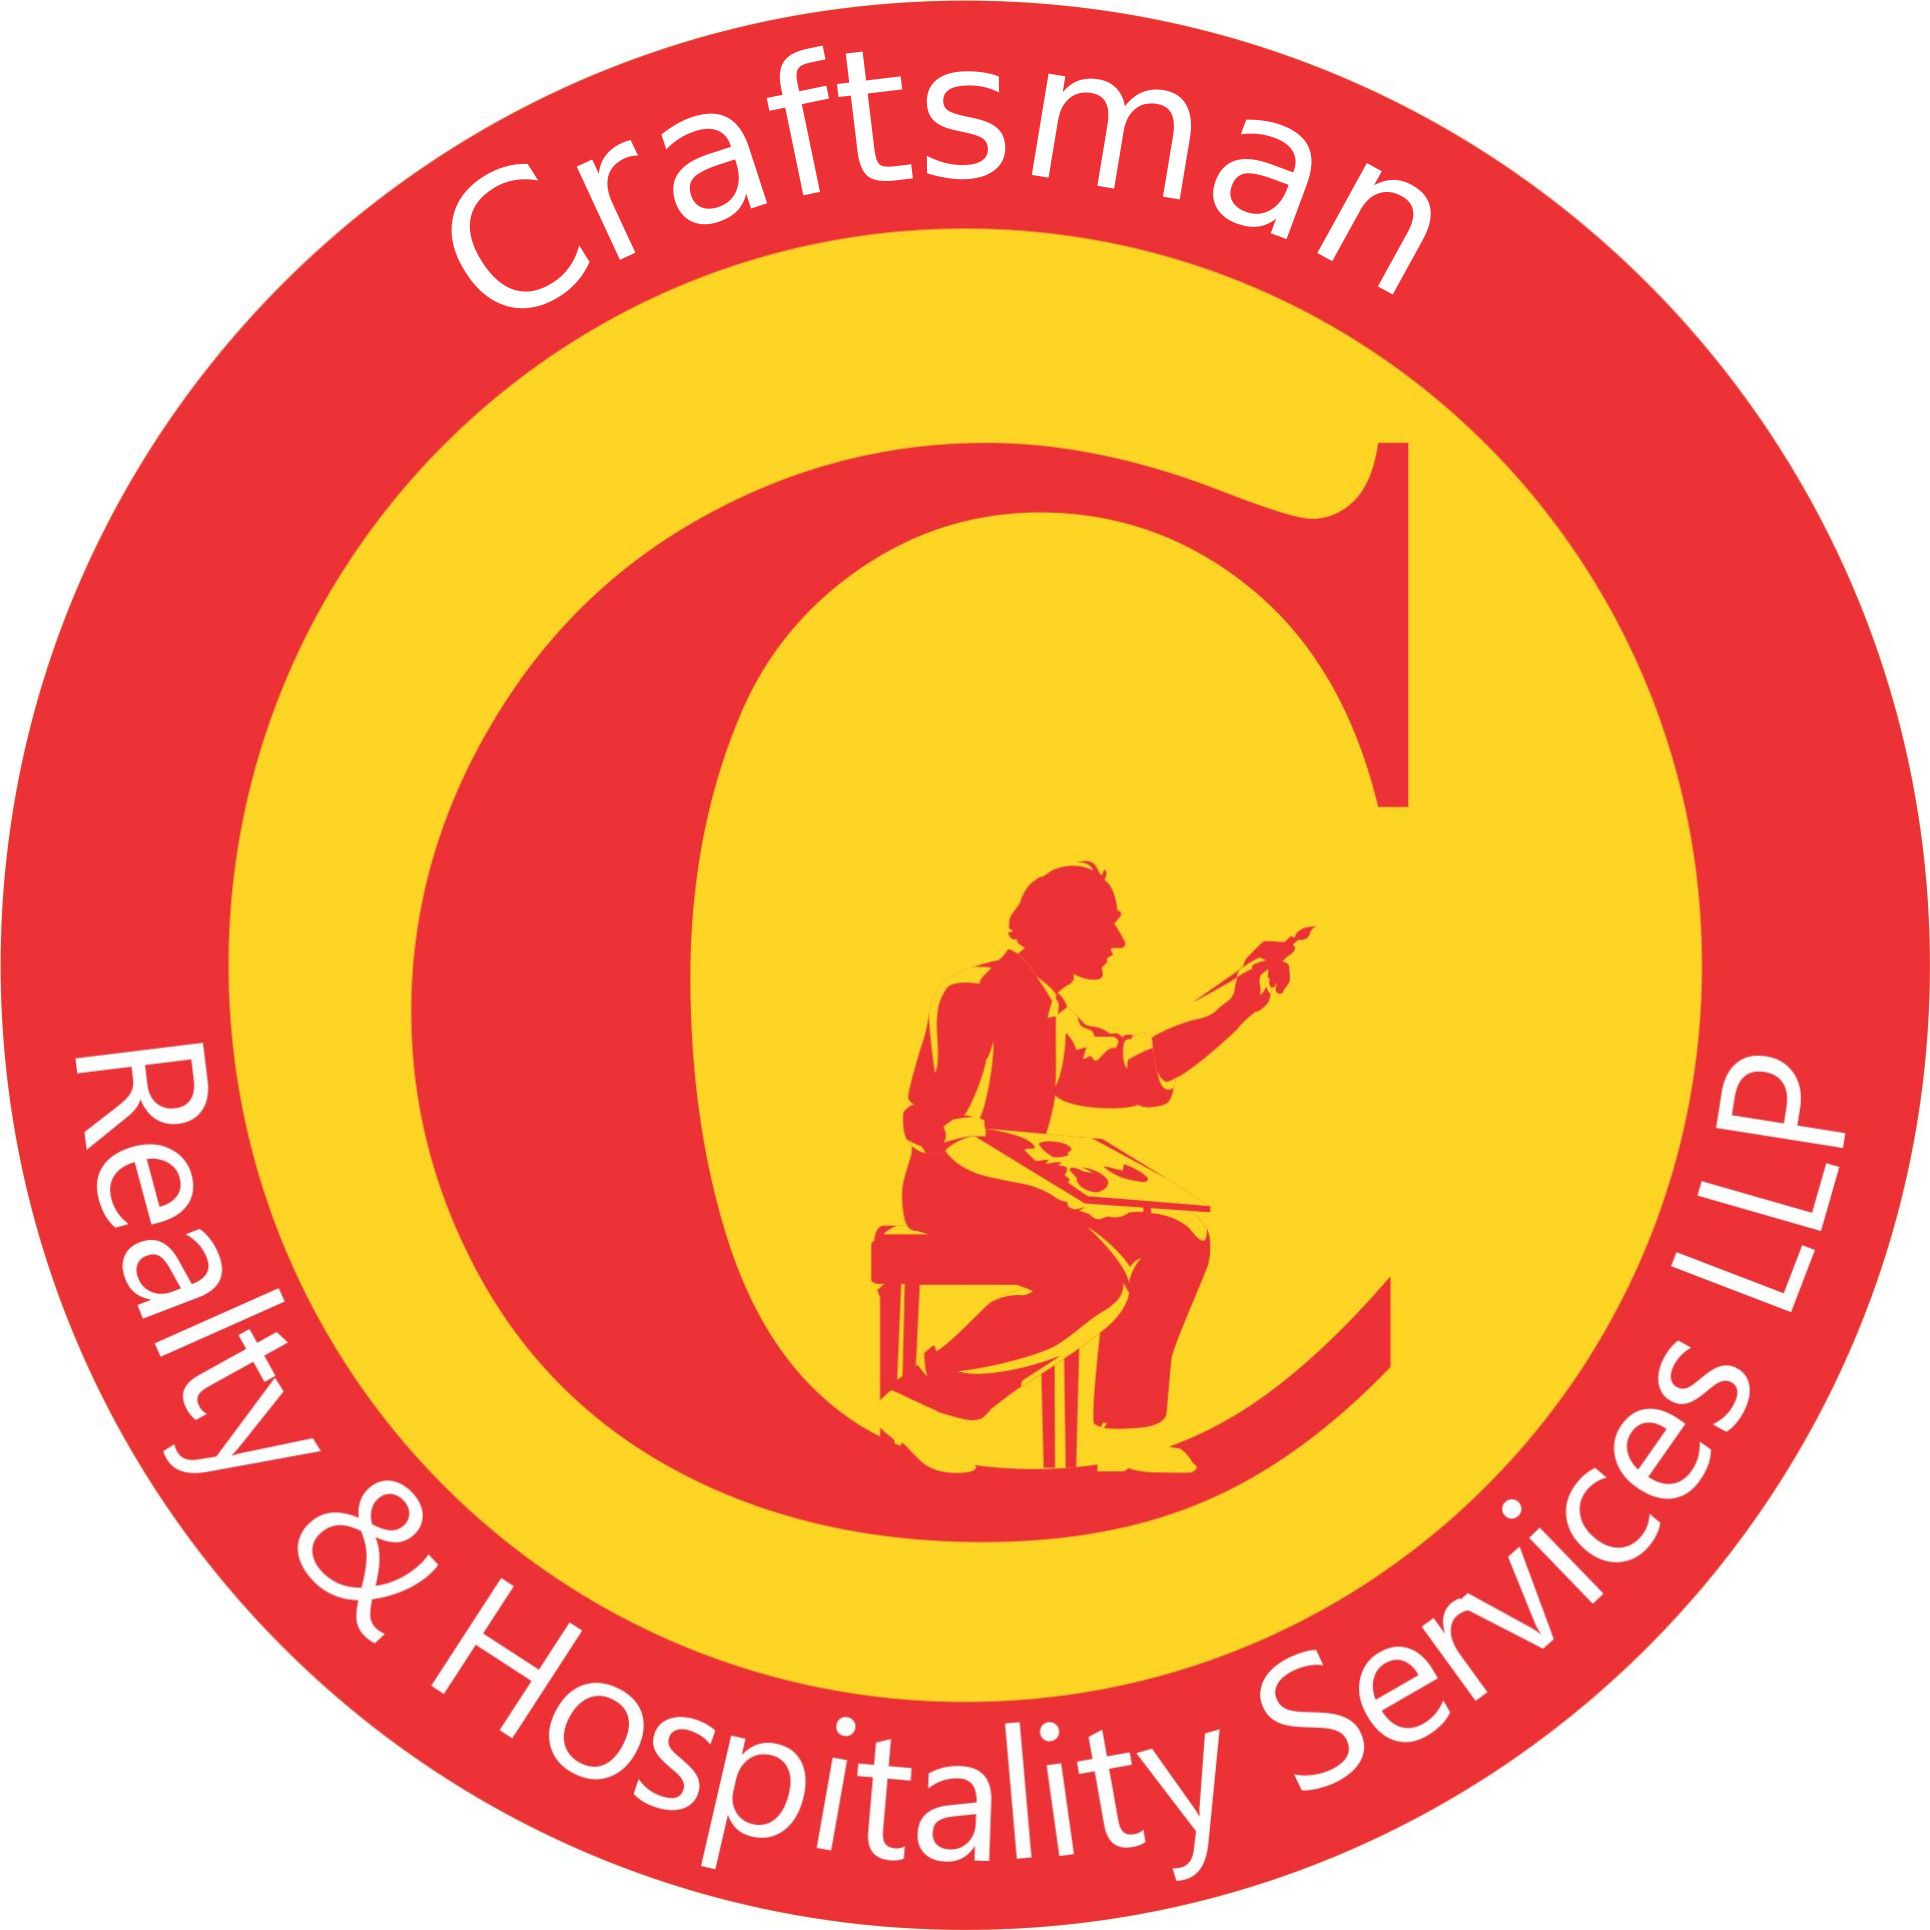 Craftsman Realty & Hospitality Services LLP